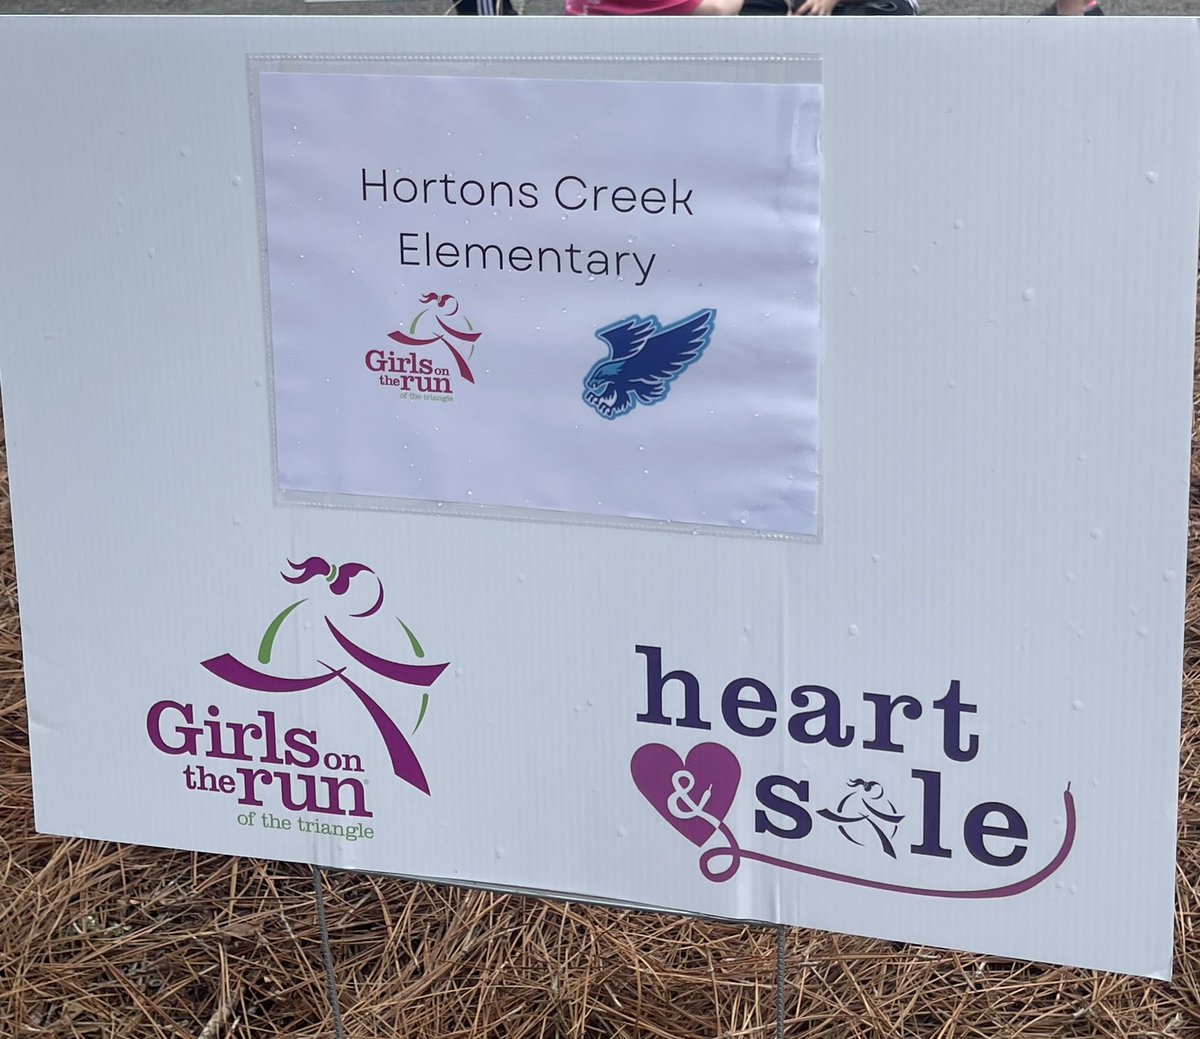 So proud of our @HortonsCreekES @GOTRTriangle team that ran the end of season 5k today! We had a great season and so thankful for Coach @TiffCooper123 for her leadership this season! #togetherisbetter More pics to come!